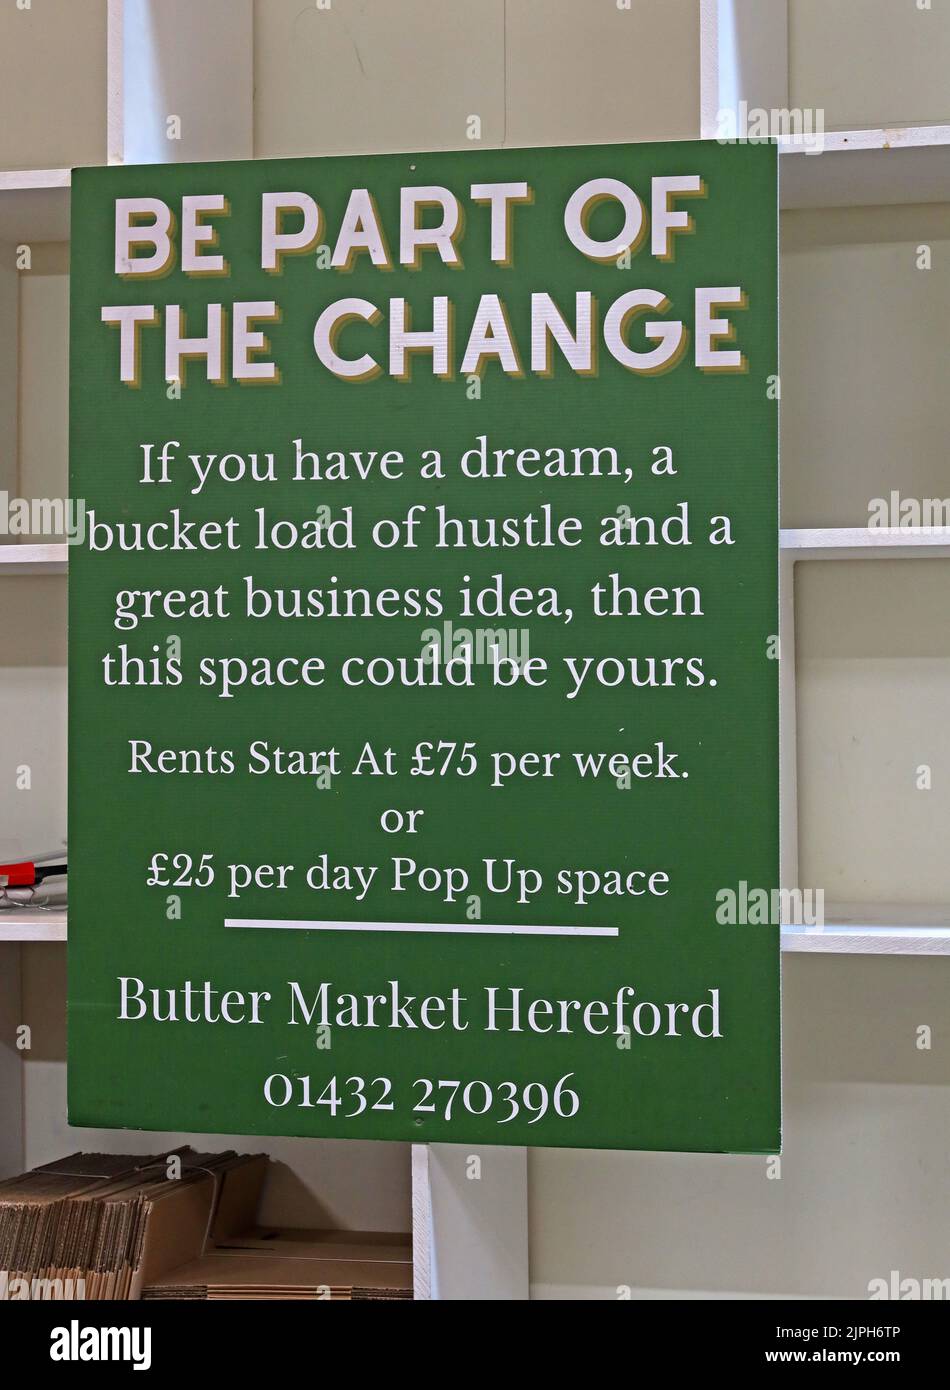 Be Part Of The Change - sign at the Butter Market, Hereford, inviting new businesses, stalls or pop up space, from £25 per day Stock Photo